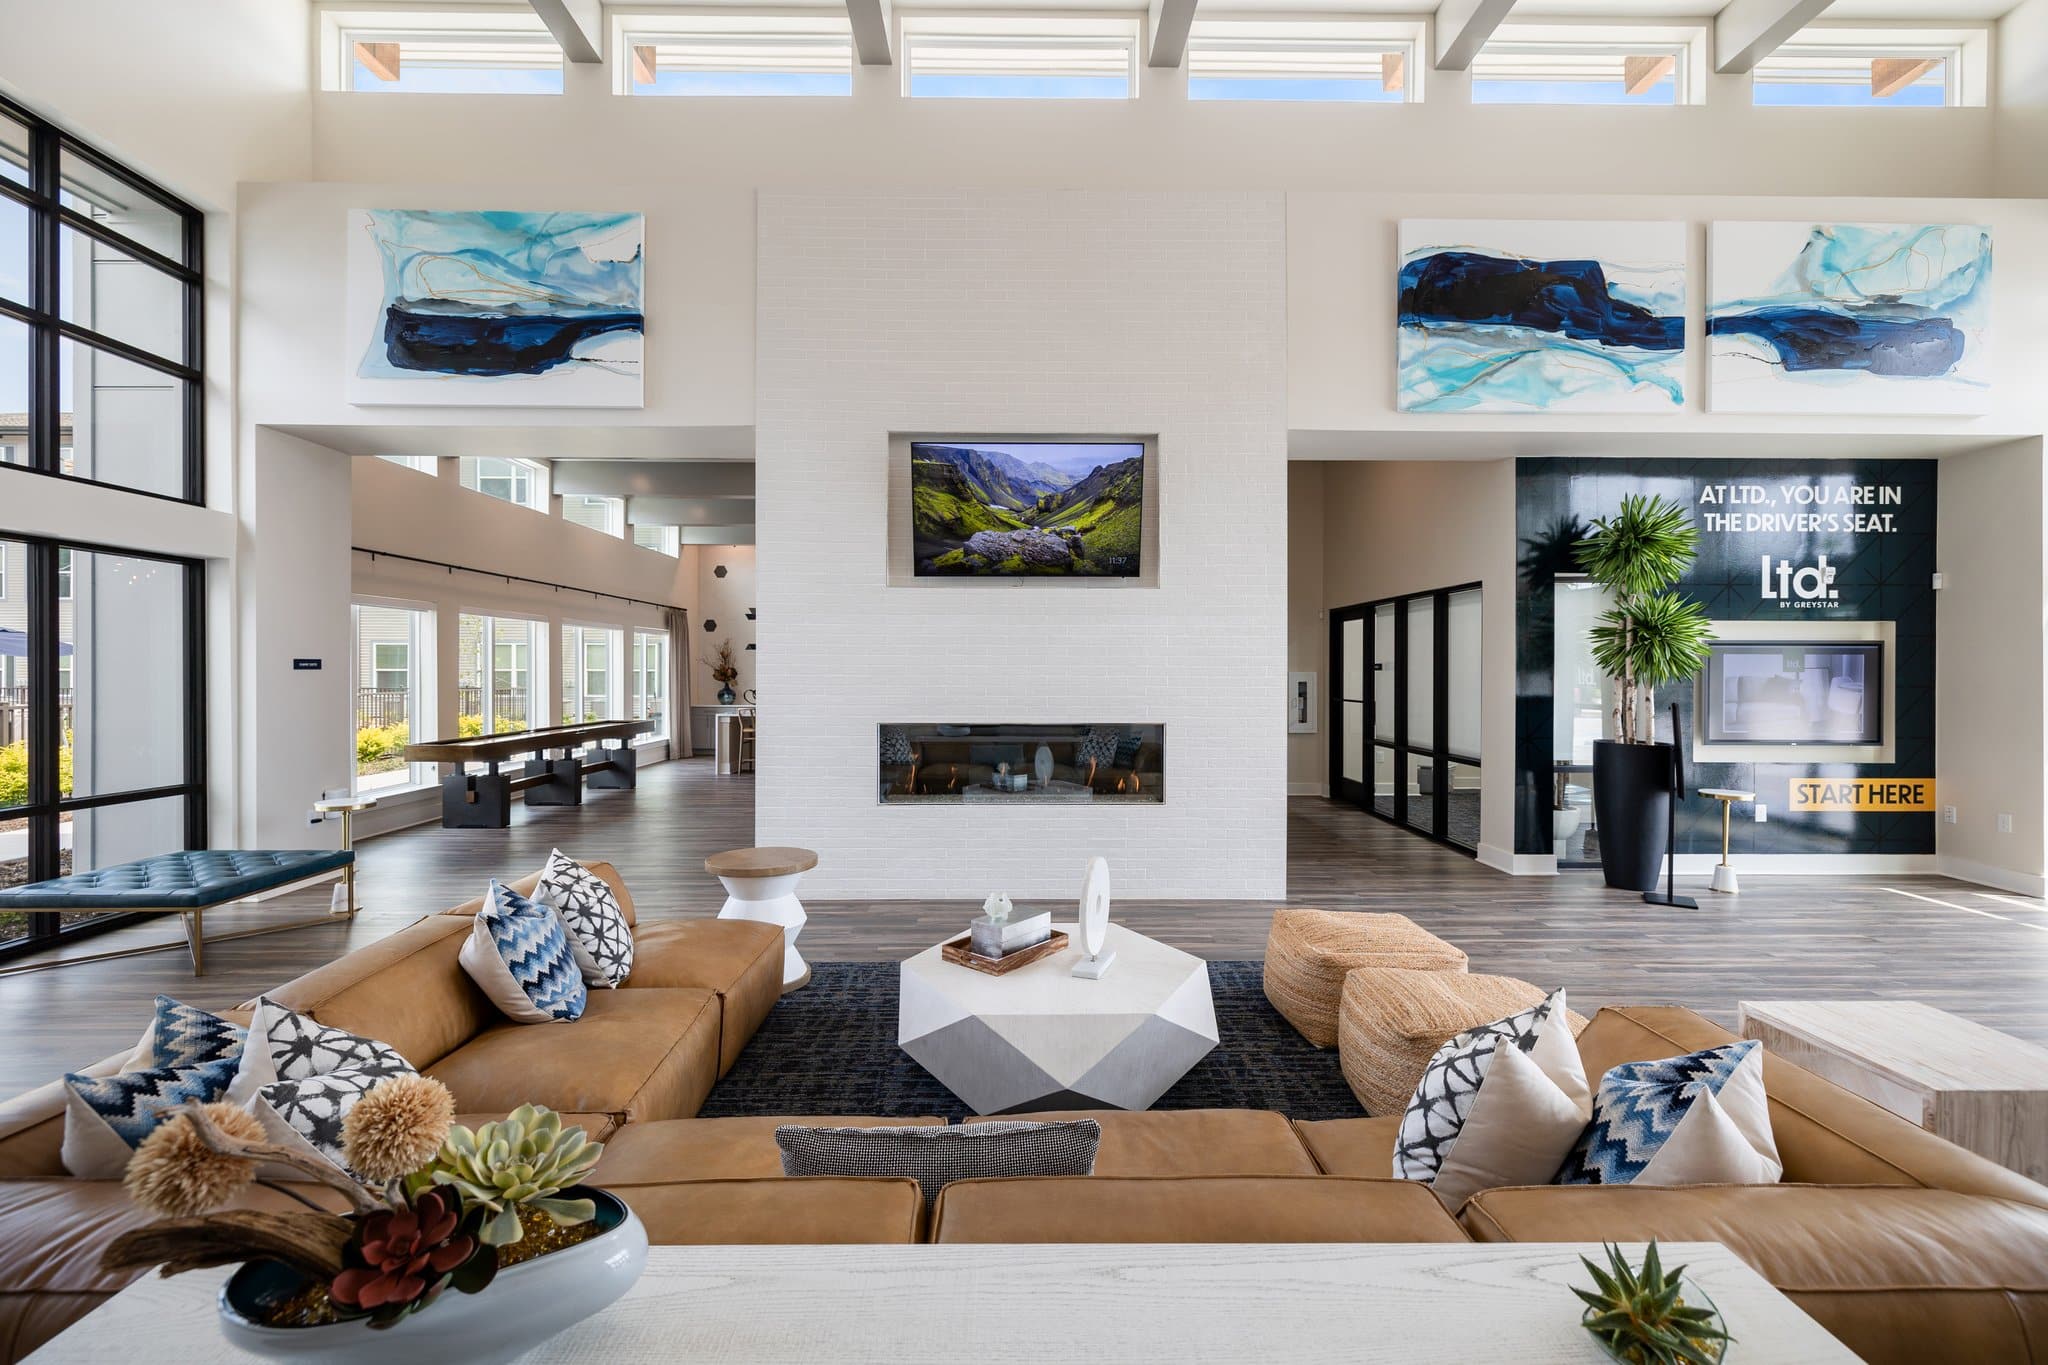 Spacious and modern clubhouse interior with high ceilings, large abstract paintings, a central fireplace, and stylish lounge seating.